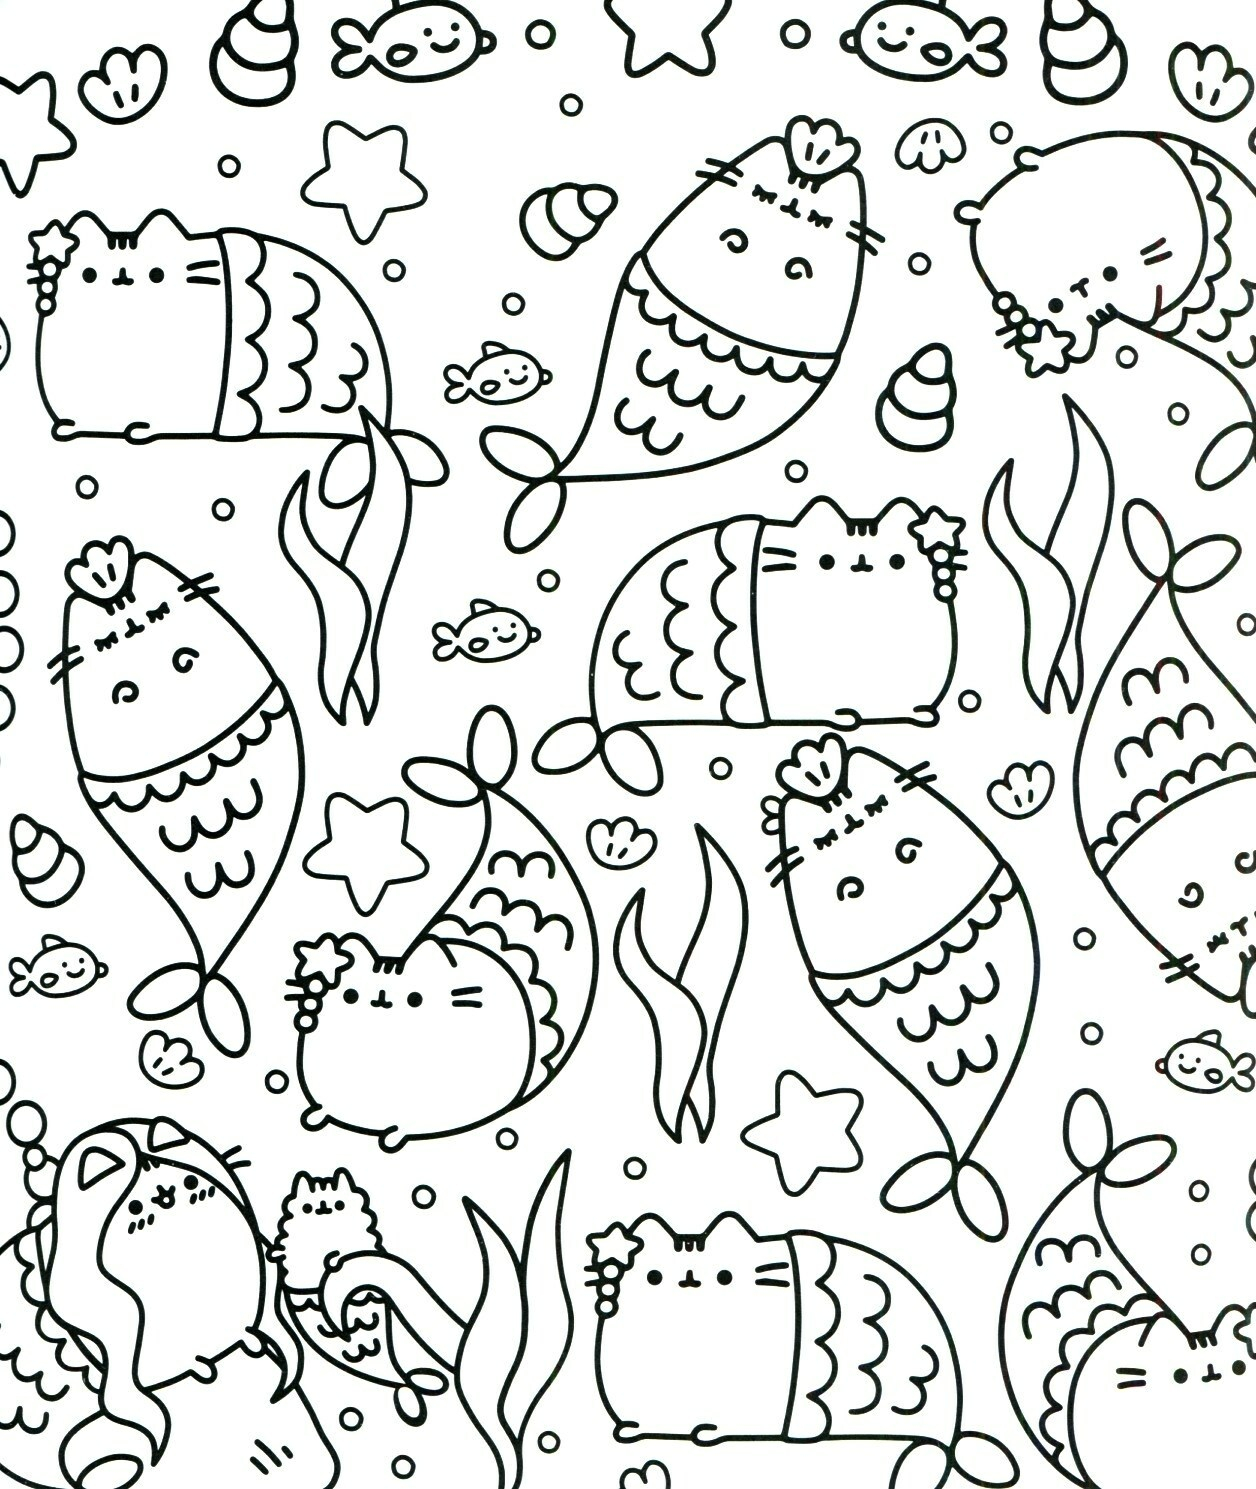 Kawaii Coloring Pages Beautiful Concept Kawaii Coloring Pages Online Waggapoultryclub